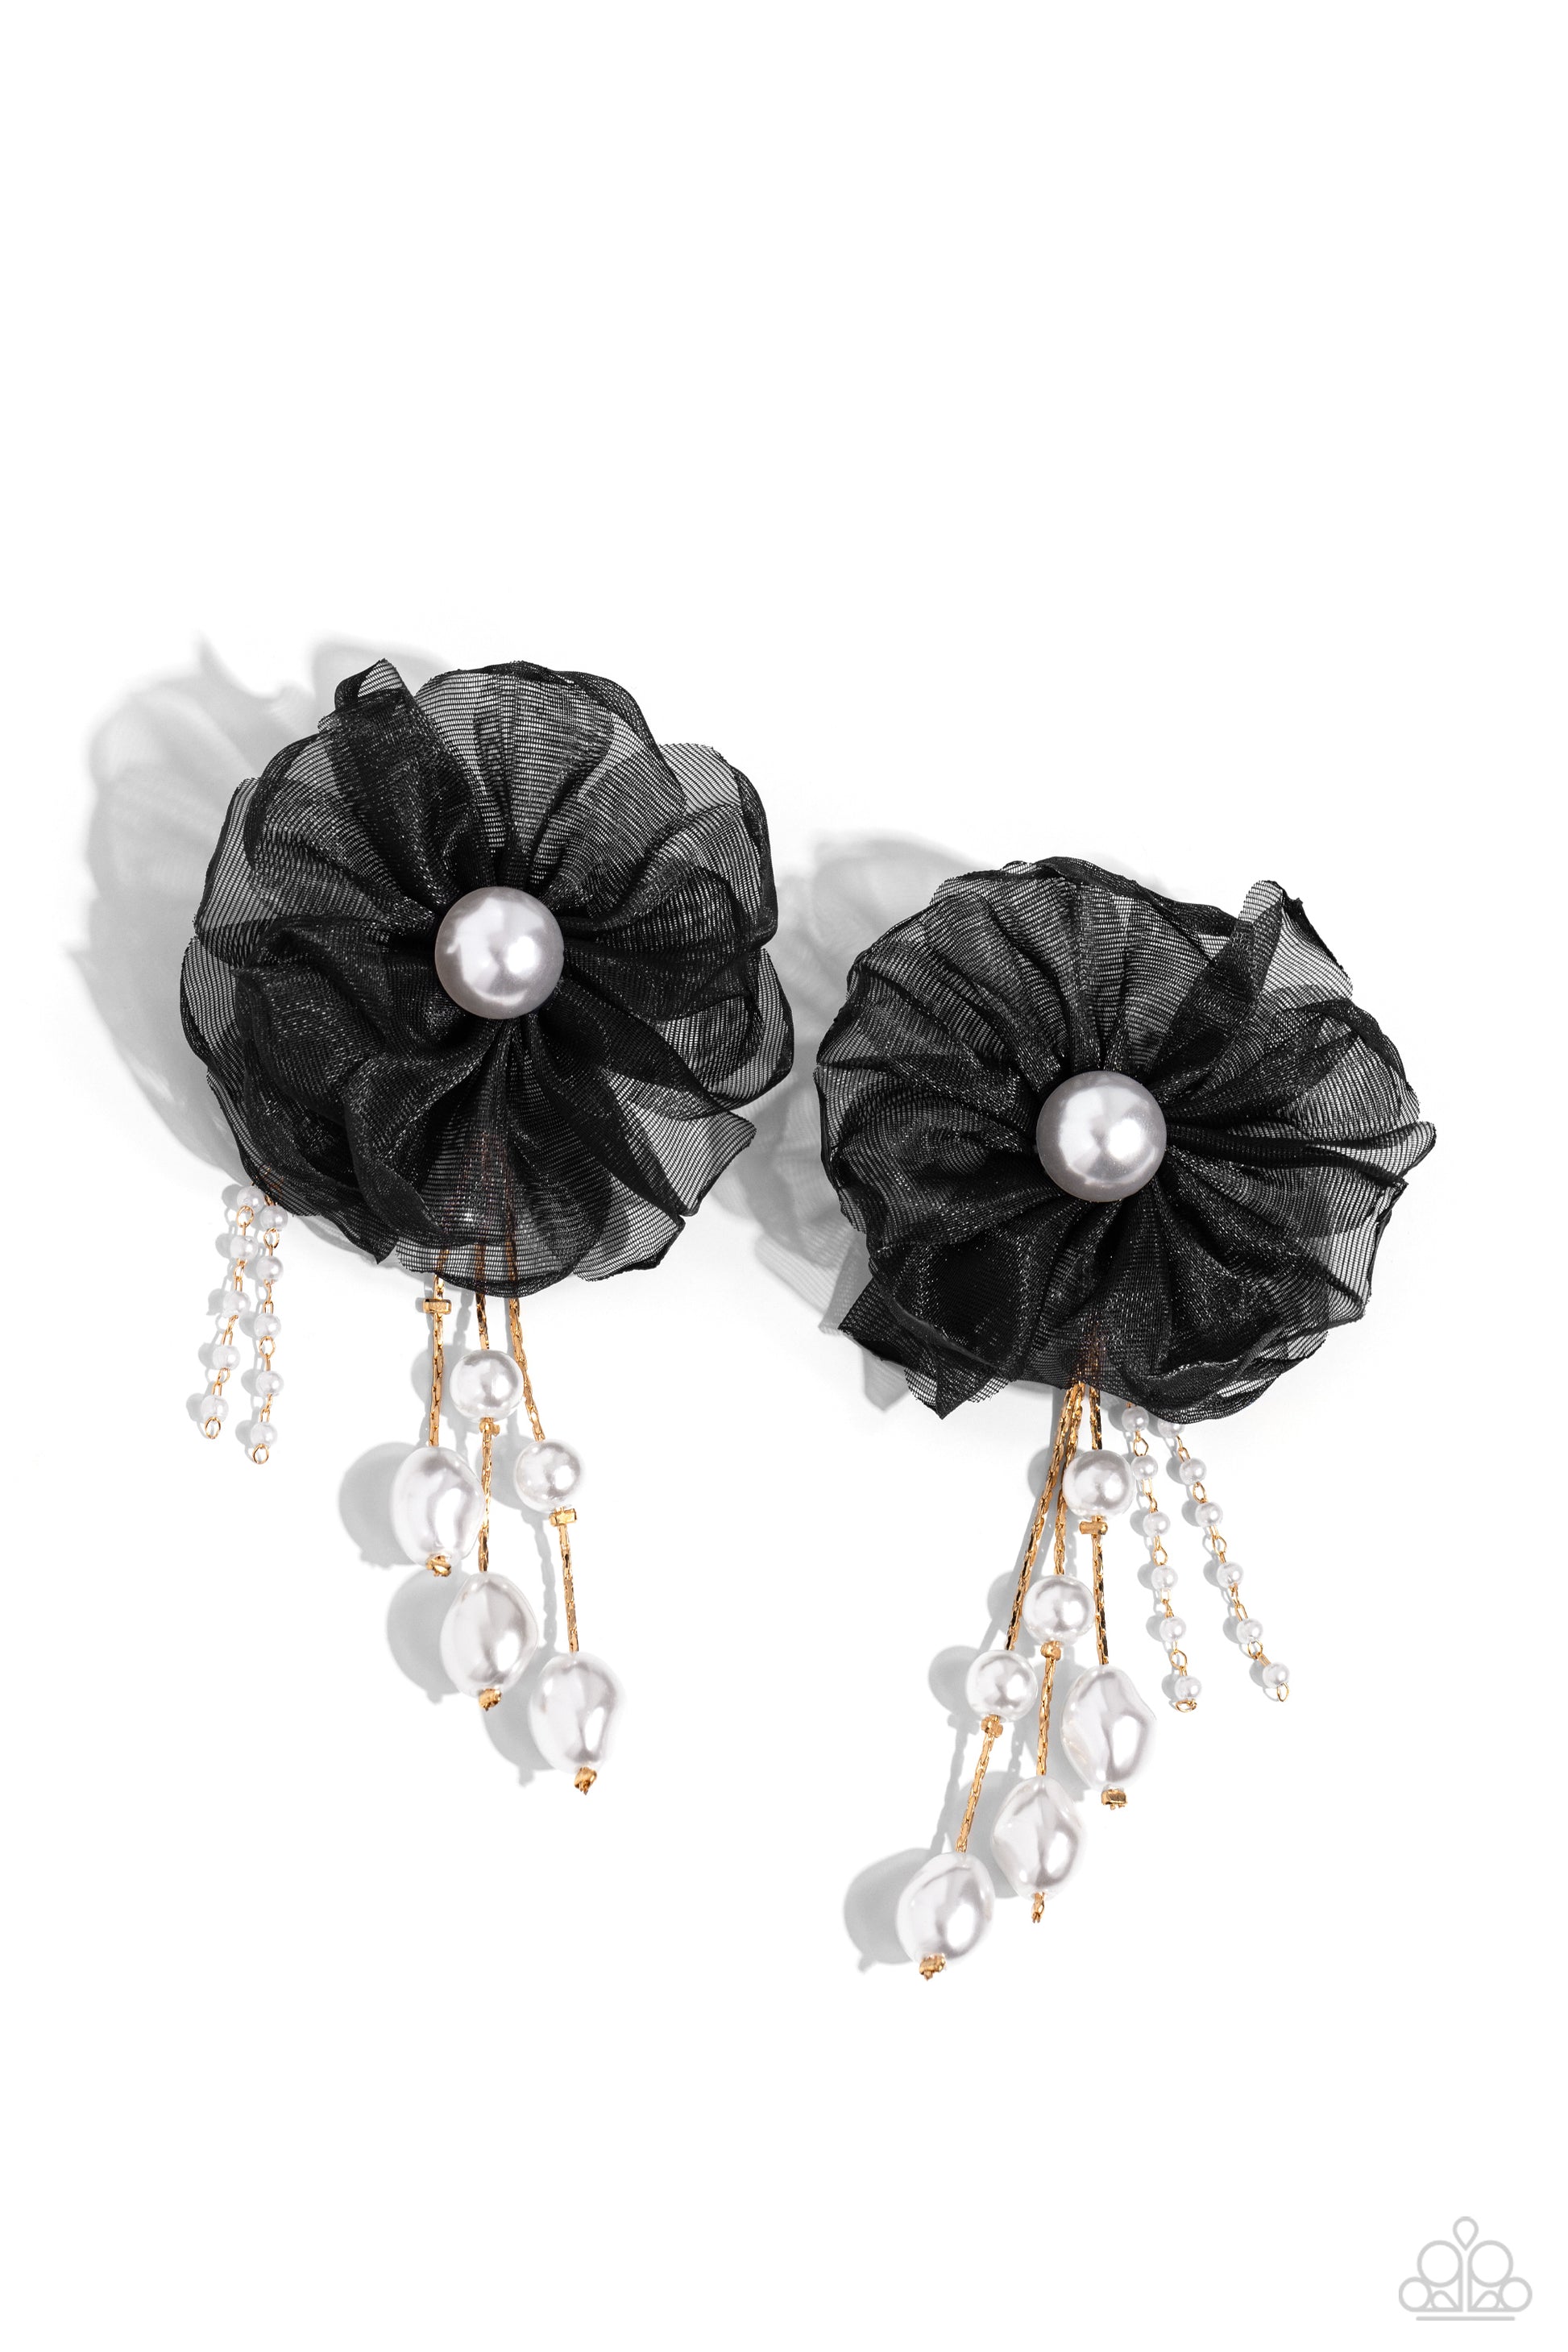 Paparazzi Accessories - Dripping in Decadence - Gold Chiffon Earrings folds of black netting gather around a glossy white pearl center, creating a spunky blossom. Cascading from the black netted petals, various white pearls in glossy, baroque, and dainty settings are infused along gold cobra chains for a refined finish. Earring attaches to a standard post fitting.  Sold as one pair of post earrings.